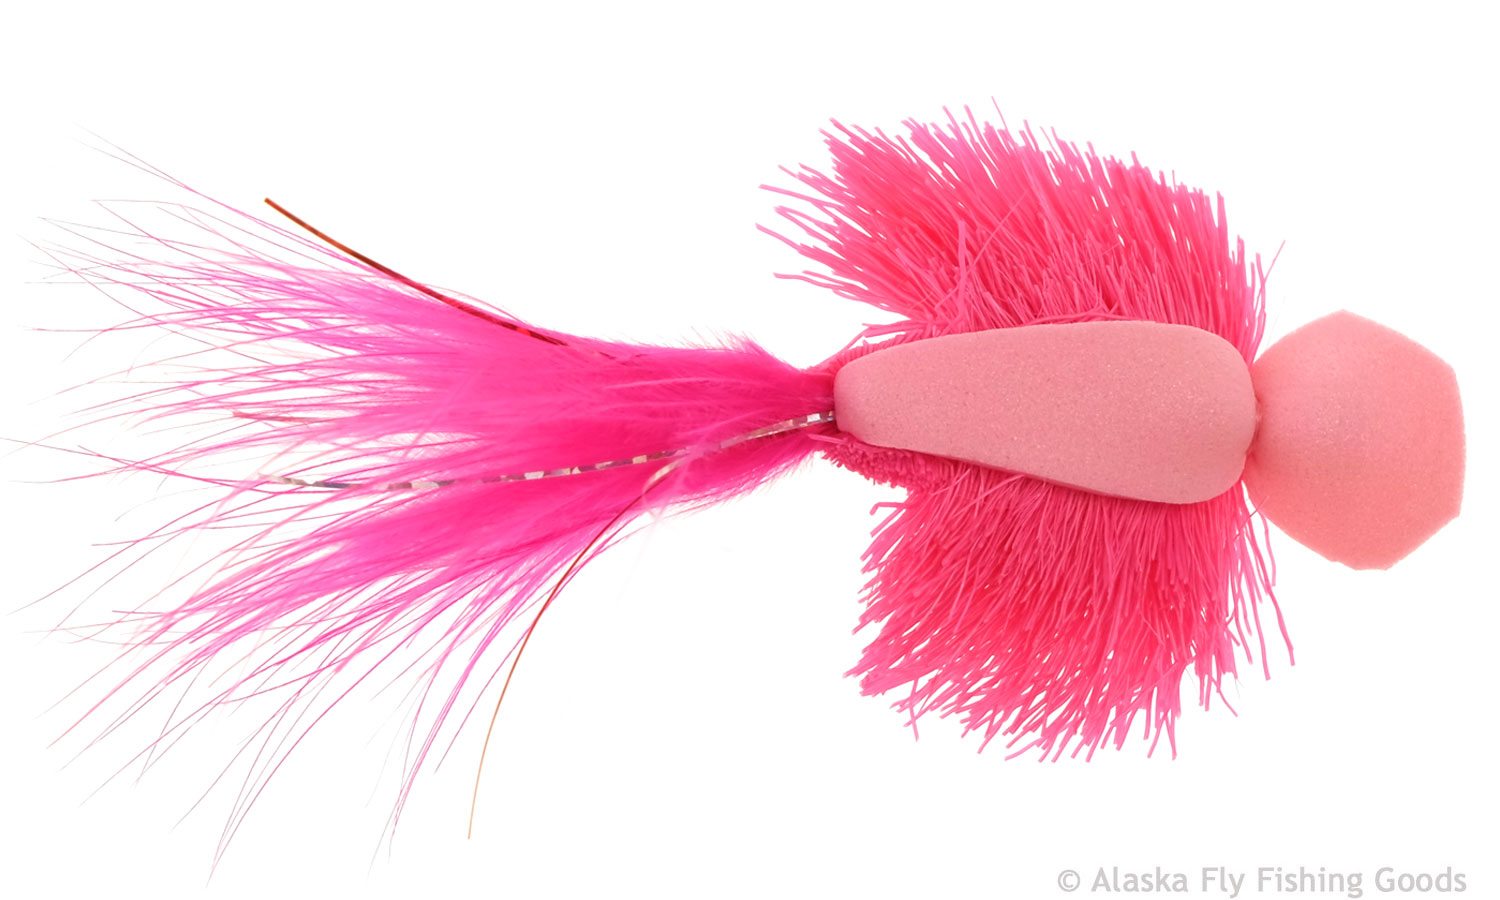 https://www.alaskaflyfishinggoods.com/wp-content/uploads/product_images/Flies_Silver_Pink_Chum020515/Poppers/4405_polywog_pink.jpg